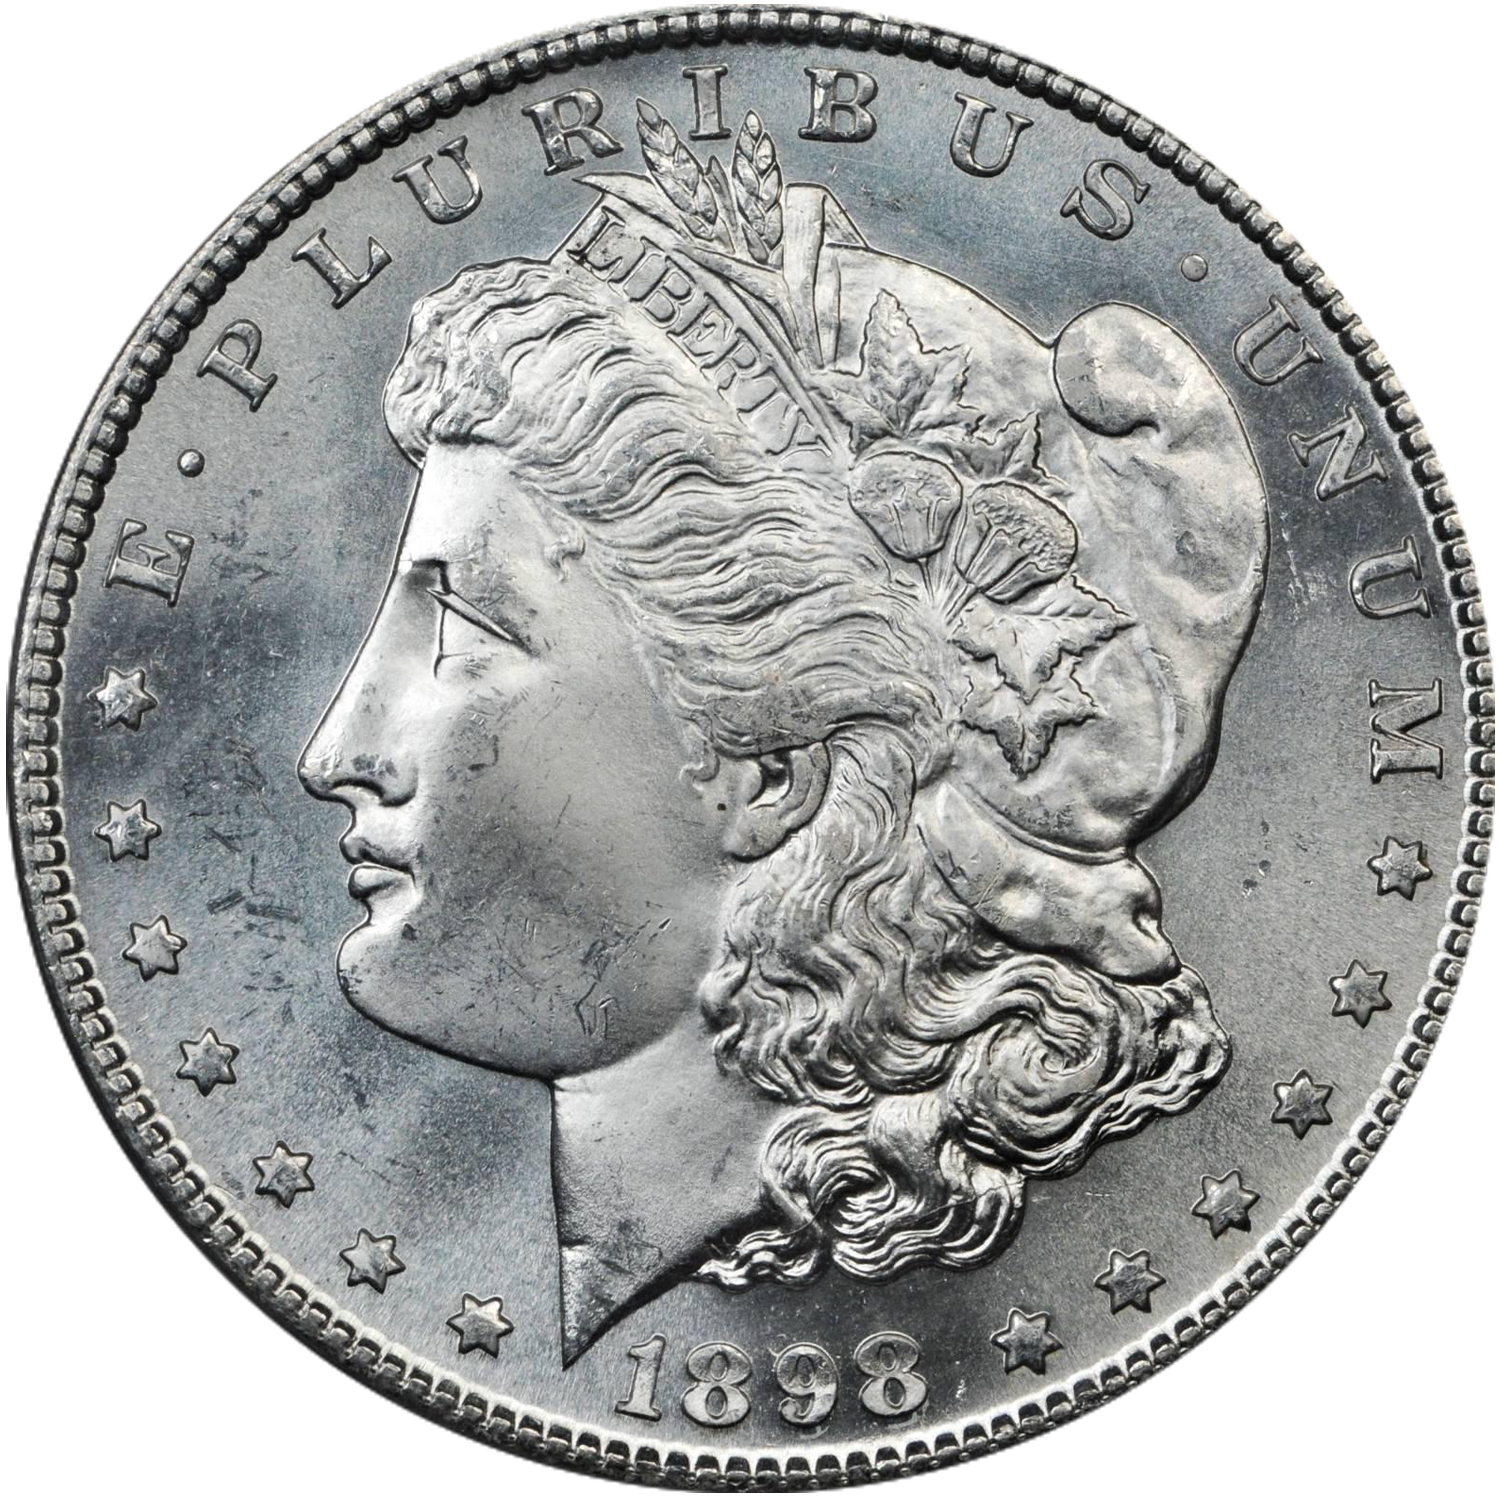 1898 s mint morgan dollar price guide value